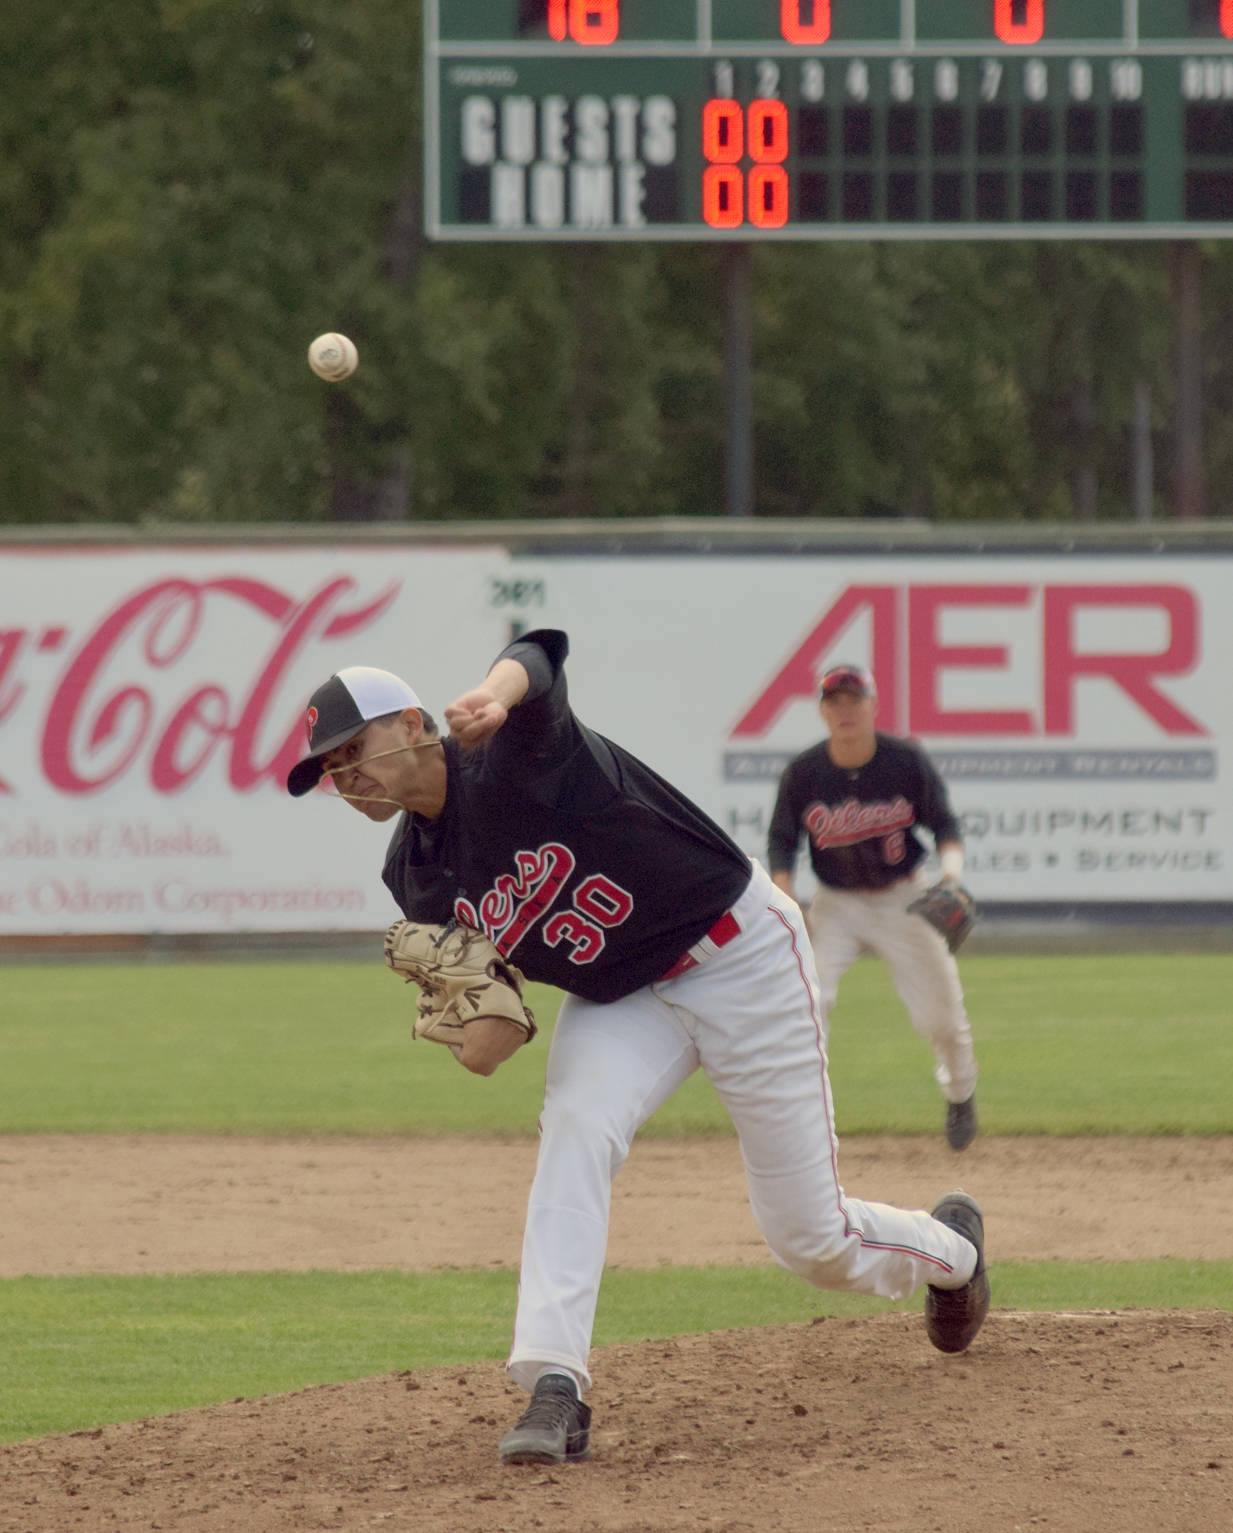 Oilers starting pitcher Christian Winston delivers to the Chugiak-Eagle River Chinooks on Sunday, June 24, 2018, at Coral Seymour Memorial Park in Kenai. (Photo by Jeff Helminiak/Peninsula Clarion)